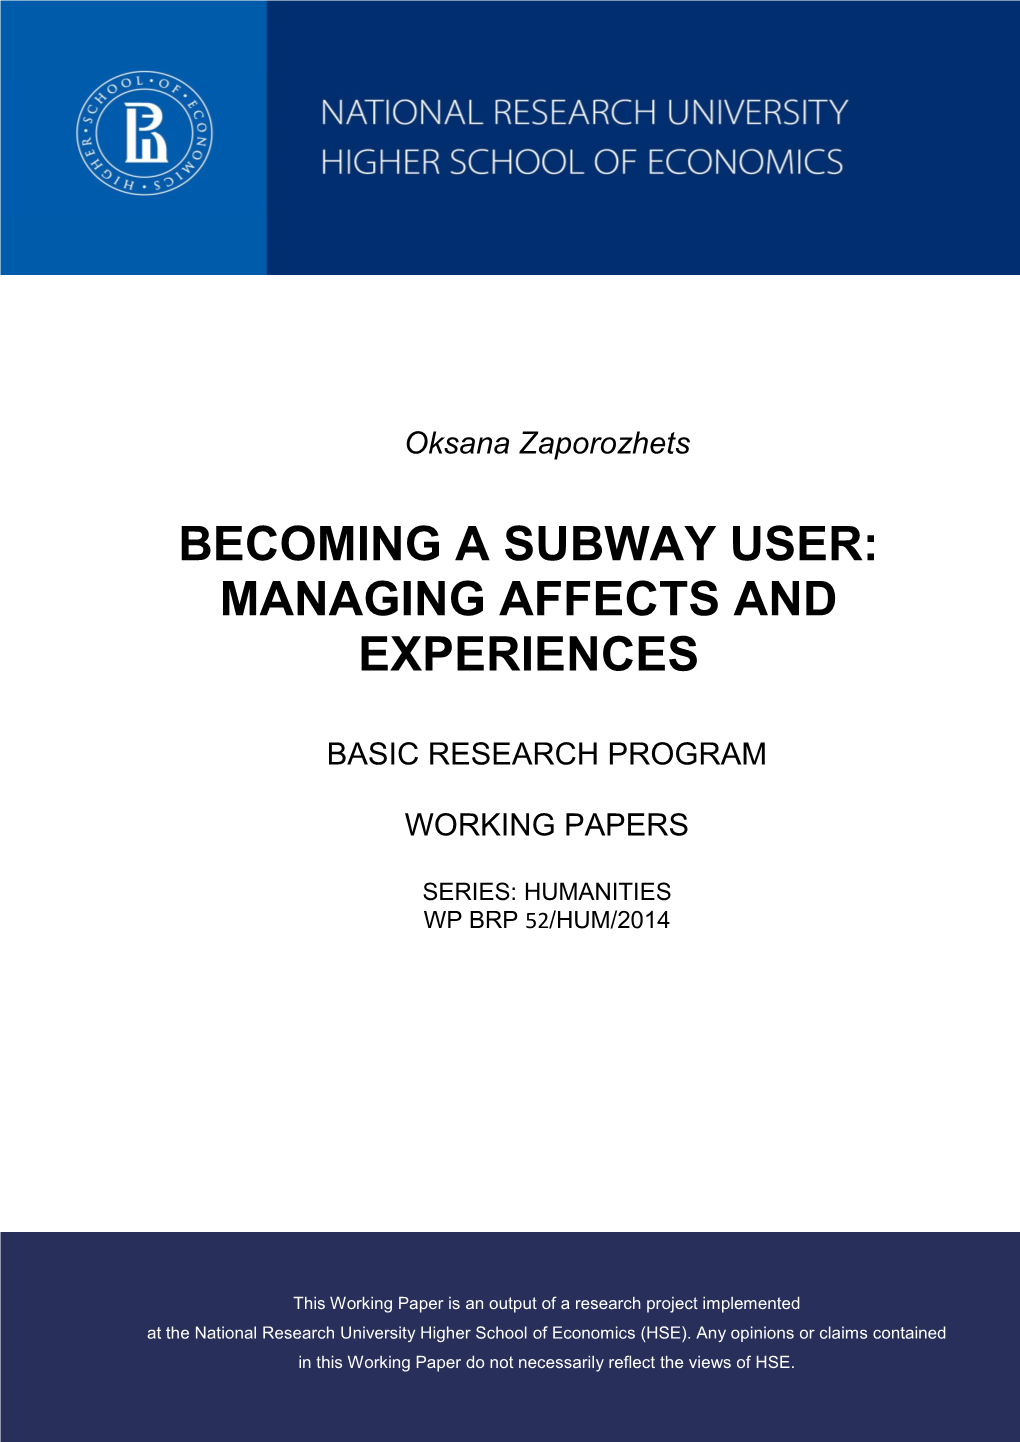 Becoming a Subway User: Managing Affects and Experiences